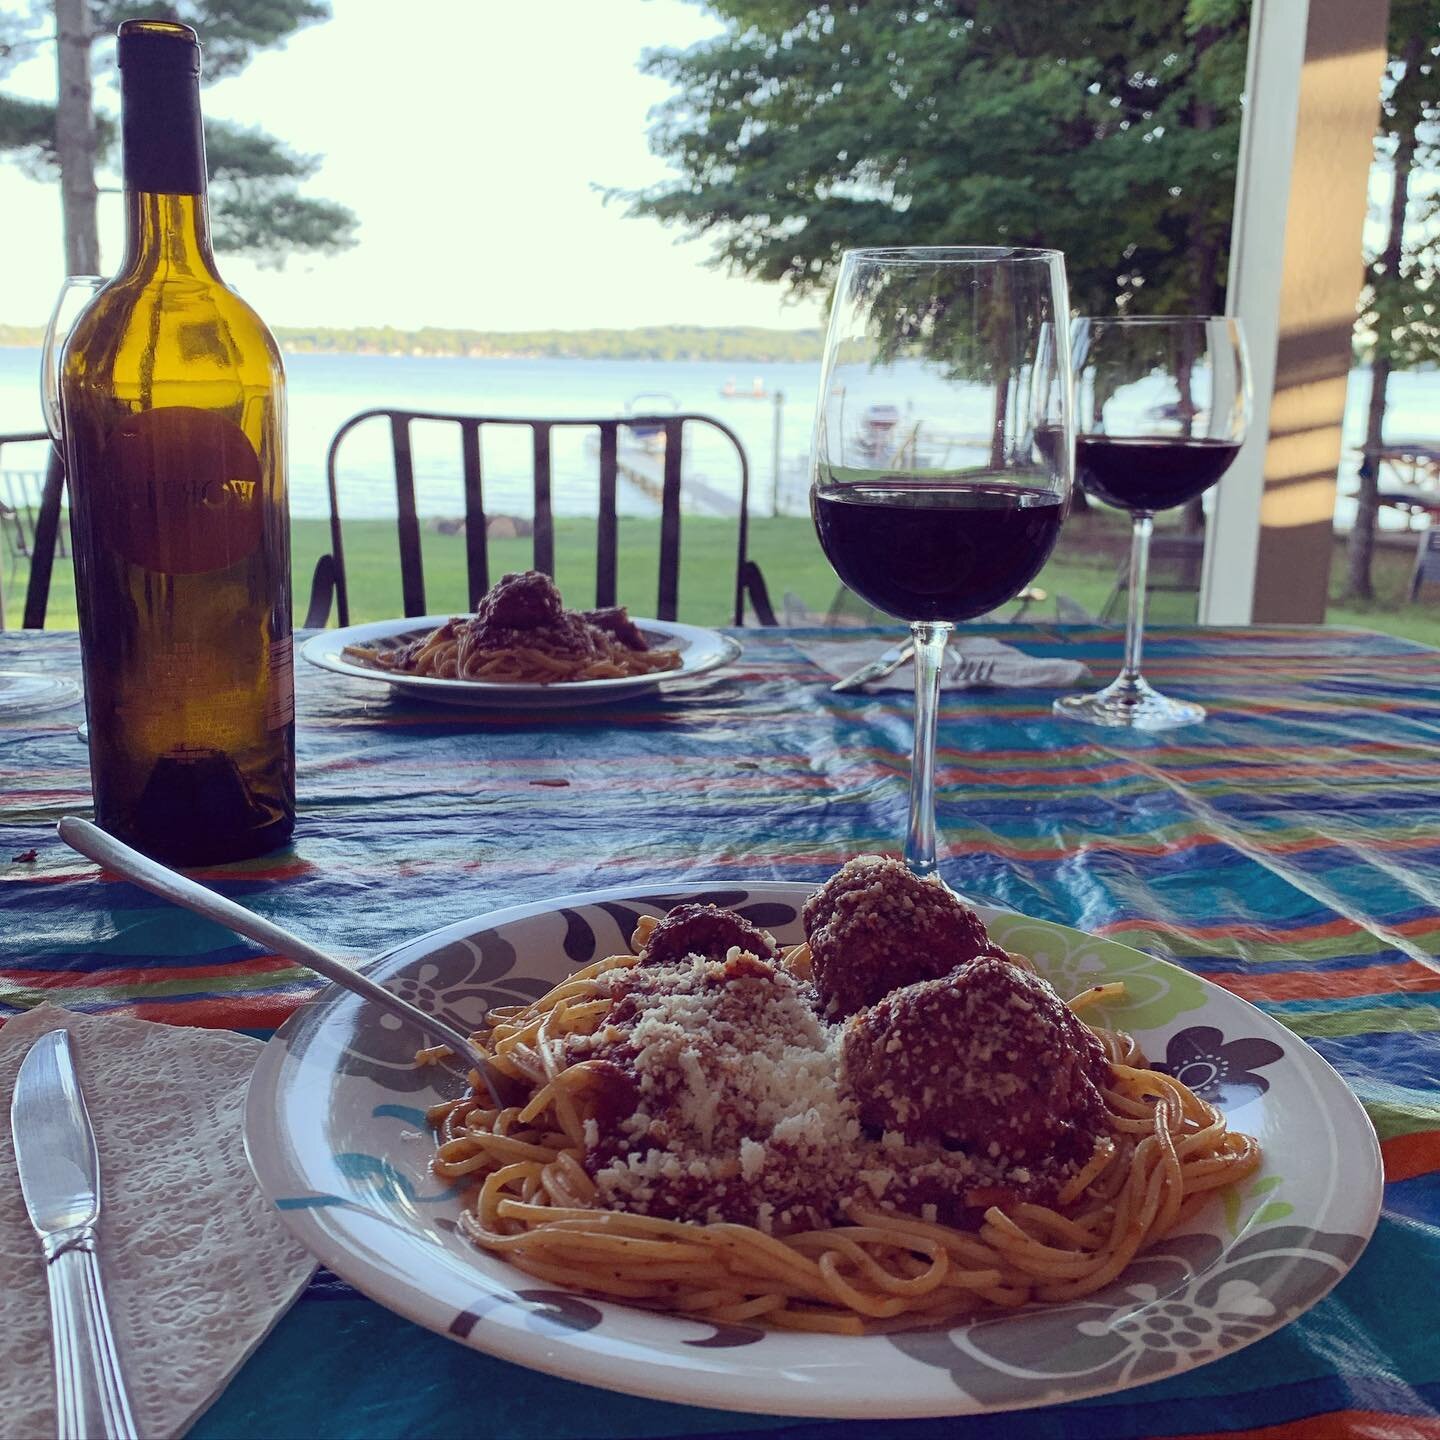 In these tough times it&rsquo;s the simple things that sometimes give us the greatest joys. I&rsquo;m so grateful for this delicious plate of homemade #spaghetti and the beautiful #lakeview #midwest #usa #lake #waterfront